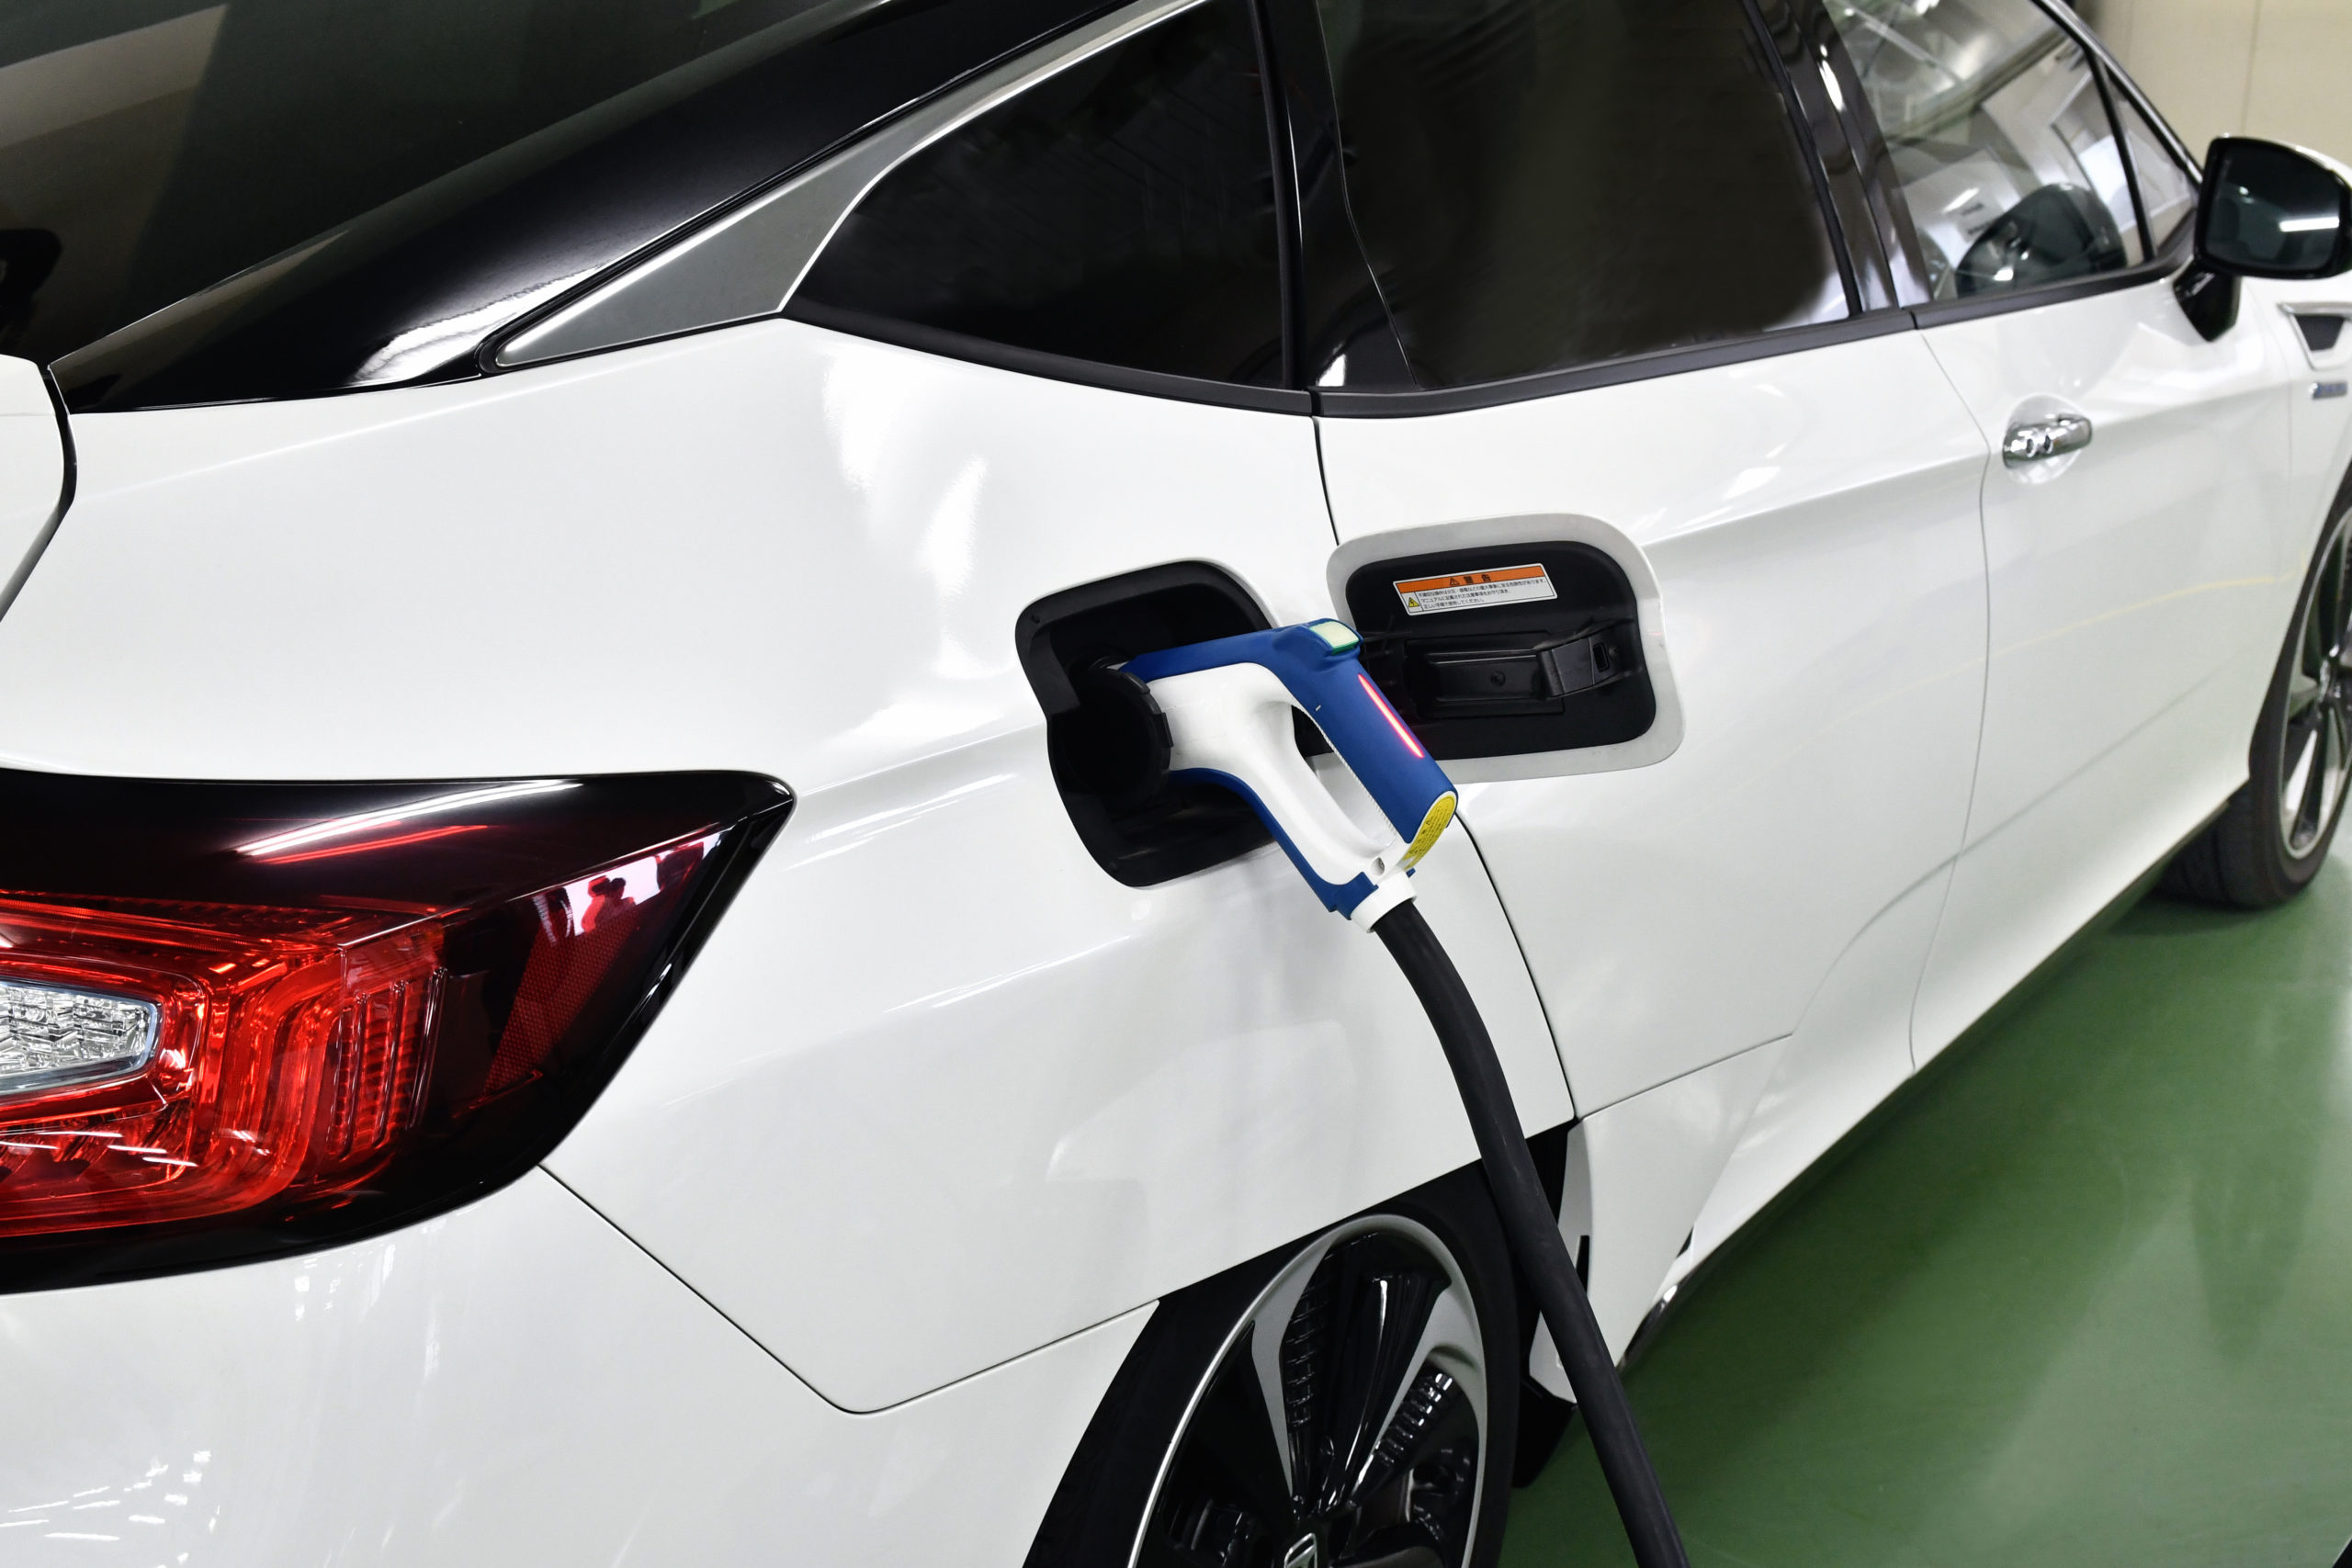 fuel cell car refueling as example of necessary hydrogen infrastructure